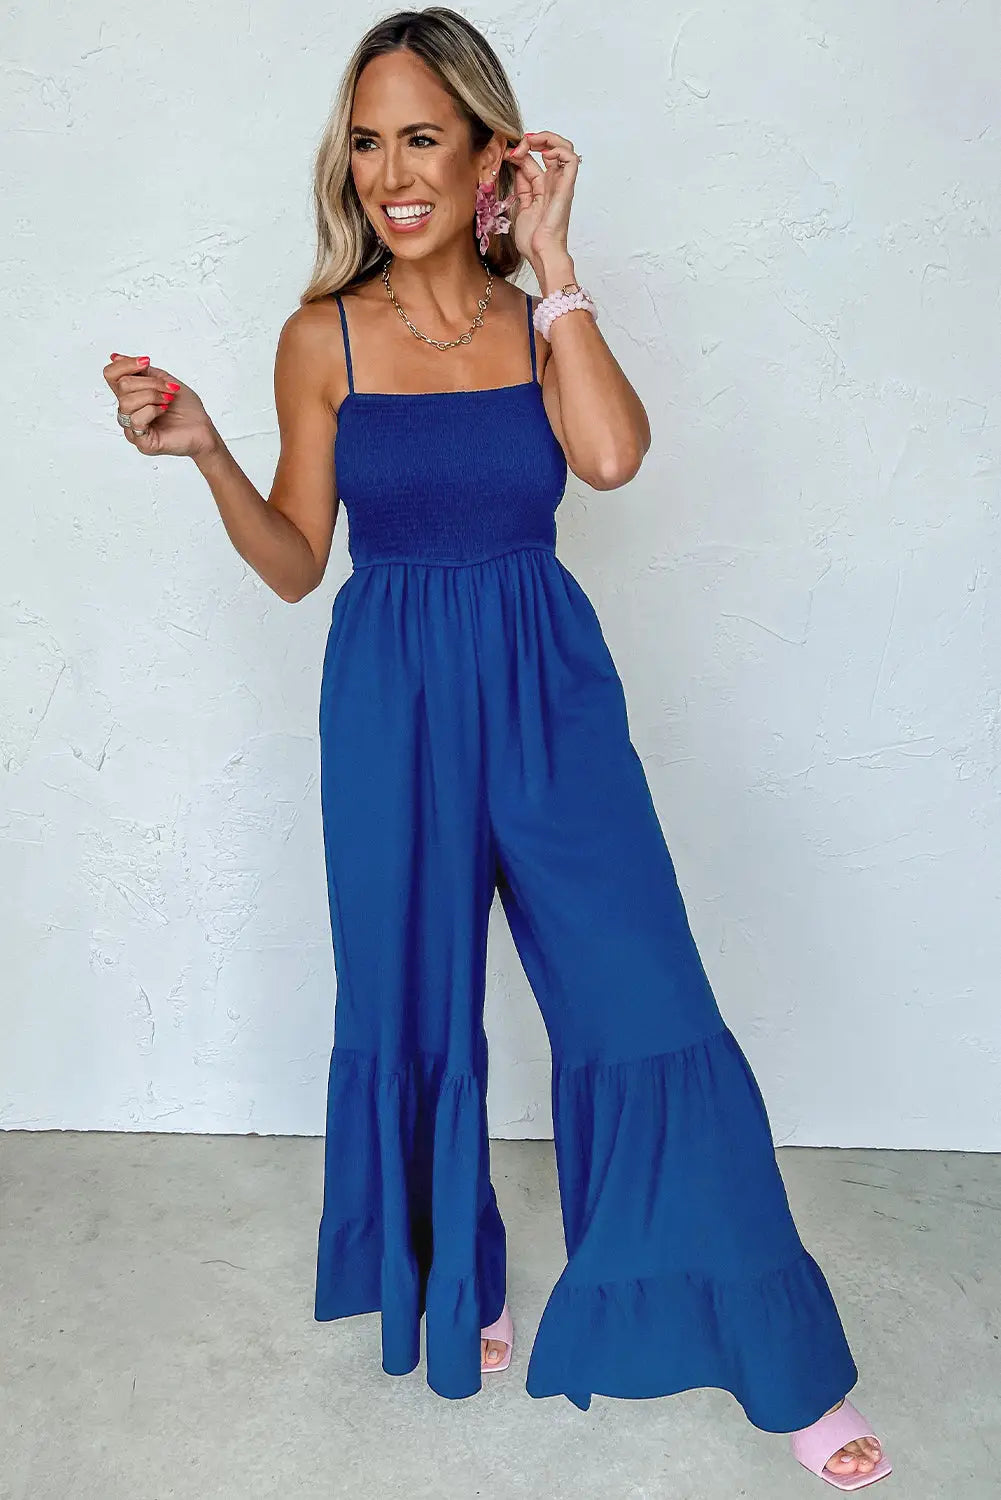 Navy blue spaghetti straps smocked ruffled wide leg jumpsuit - jumpsuits & rompers